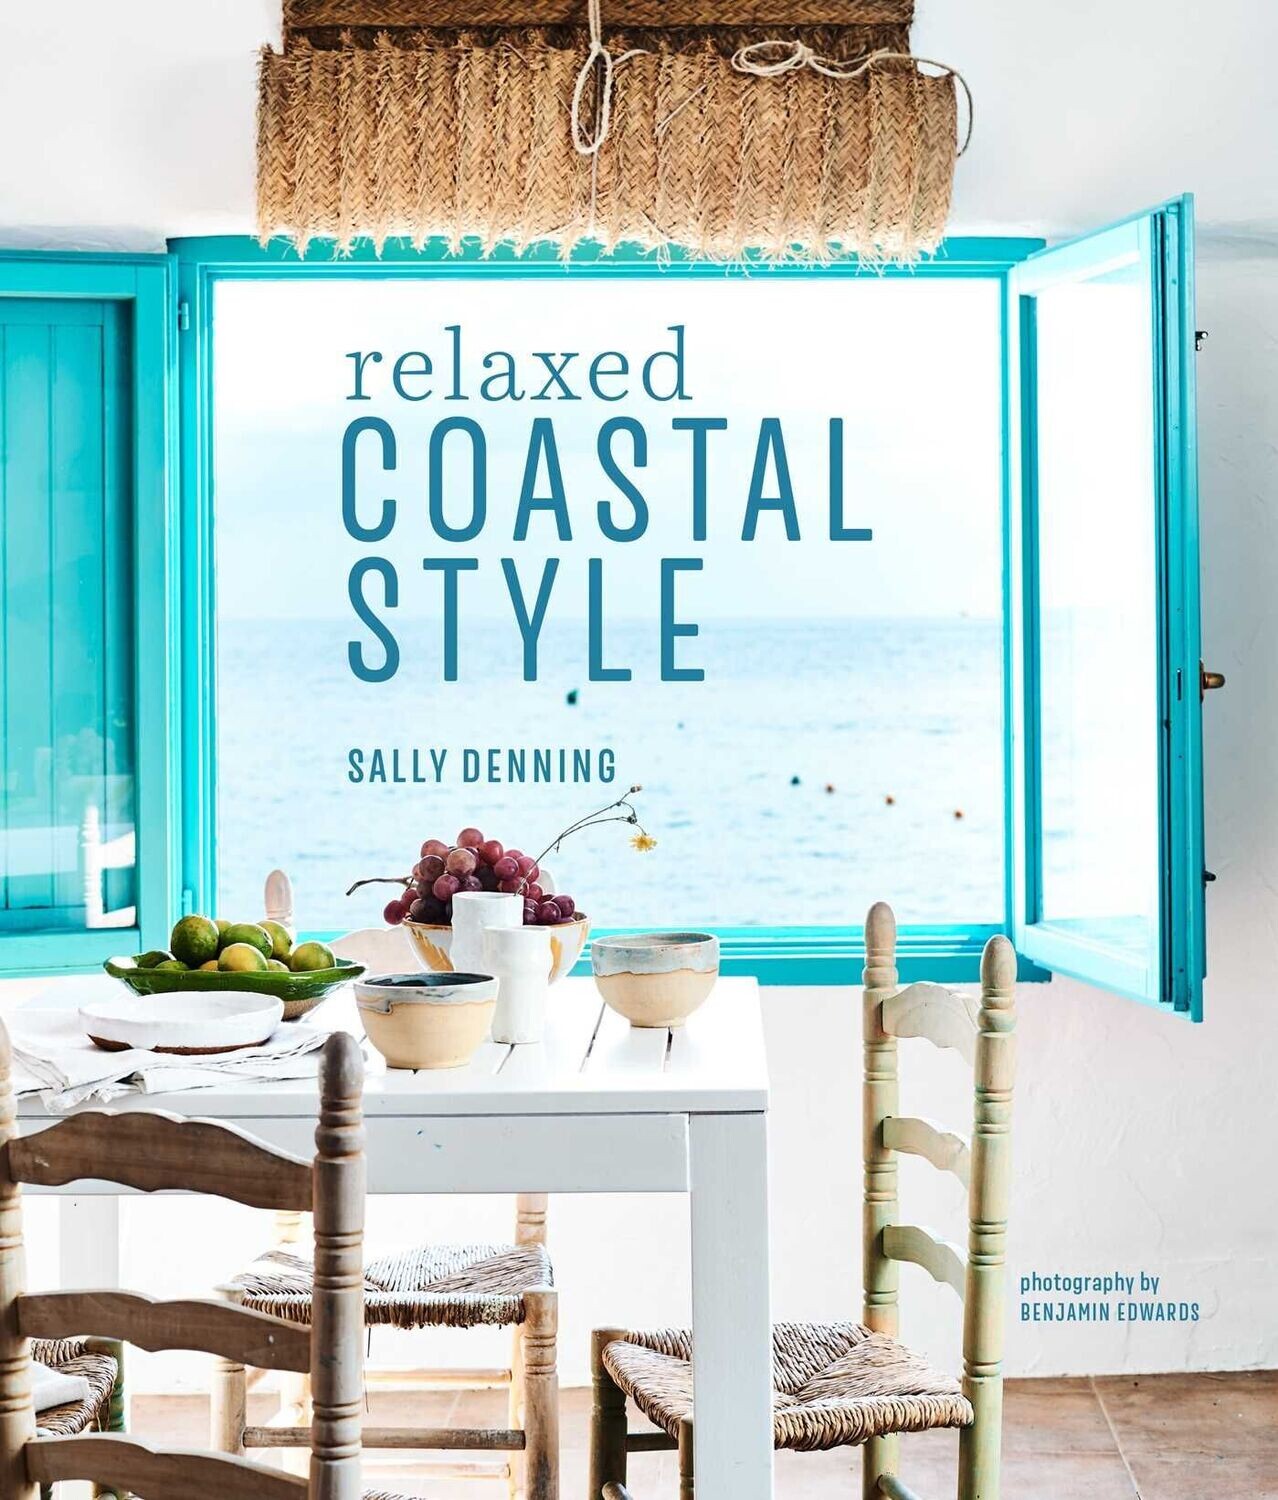 RELAXED COASTAL STYLE BY SALLY DENNING